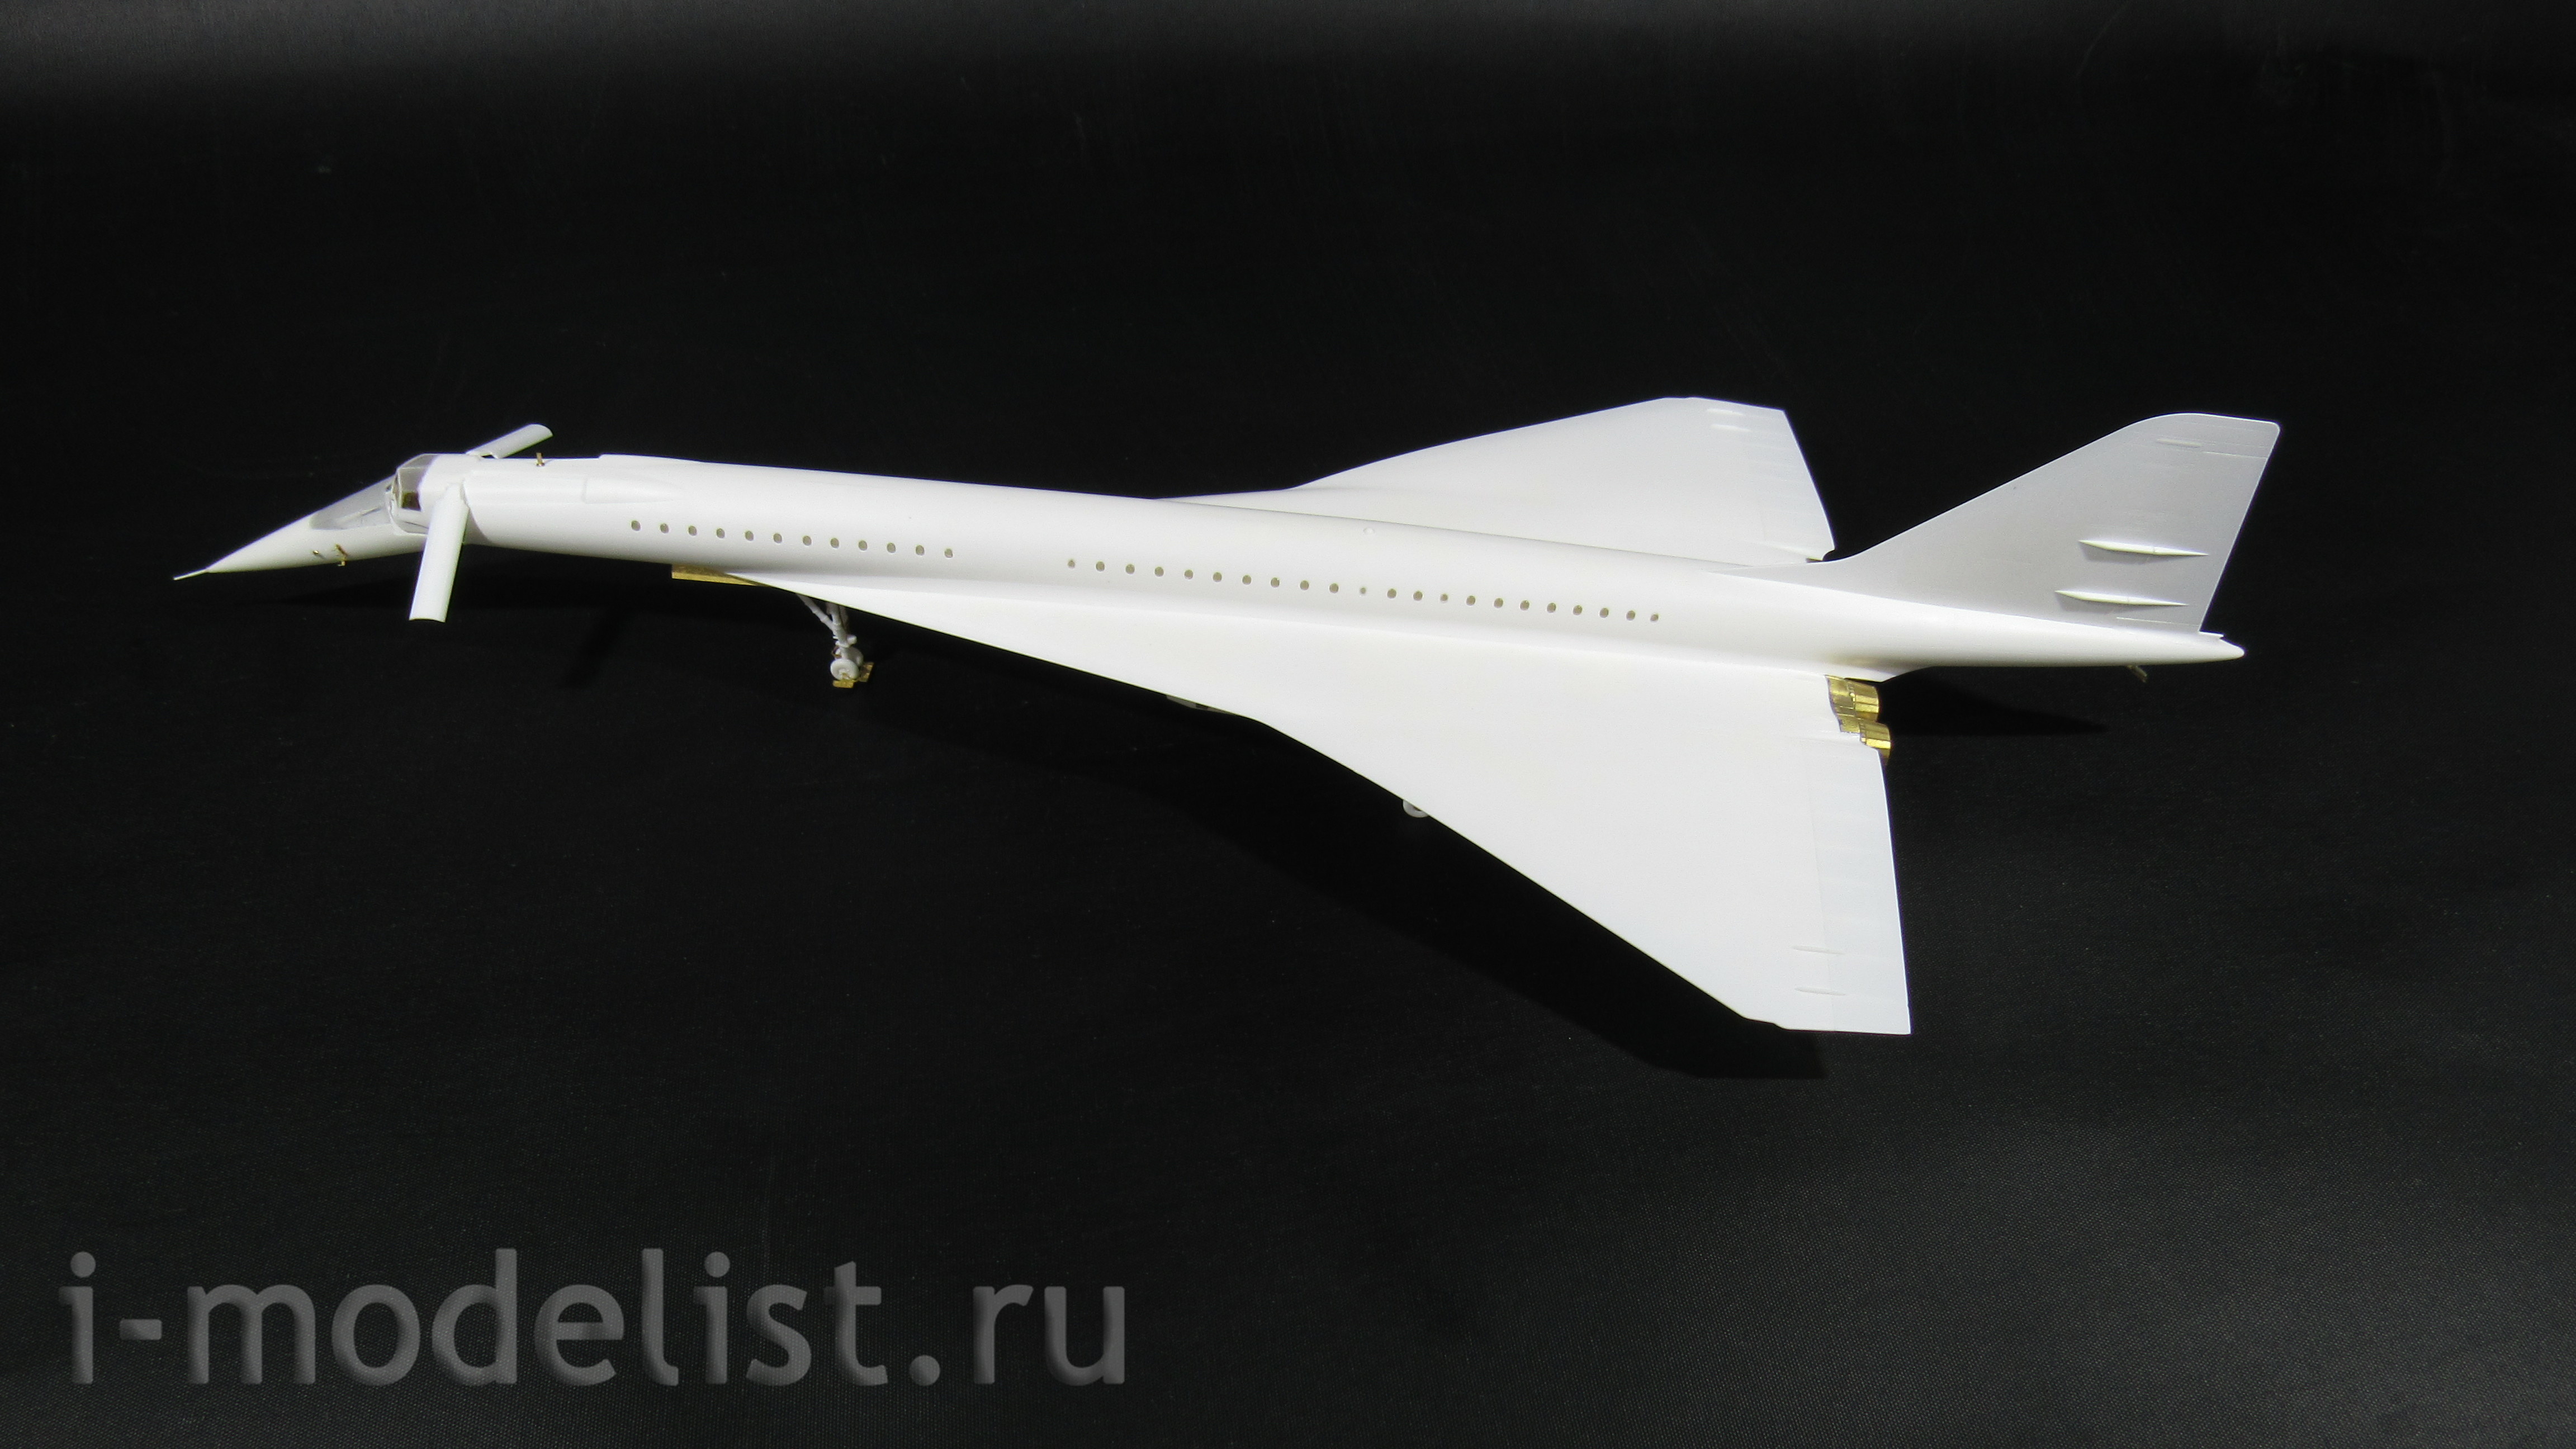 144229 Microdesign 1/144 photo etching kit for the Tu-144 model (exterior) from ICM